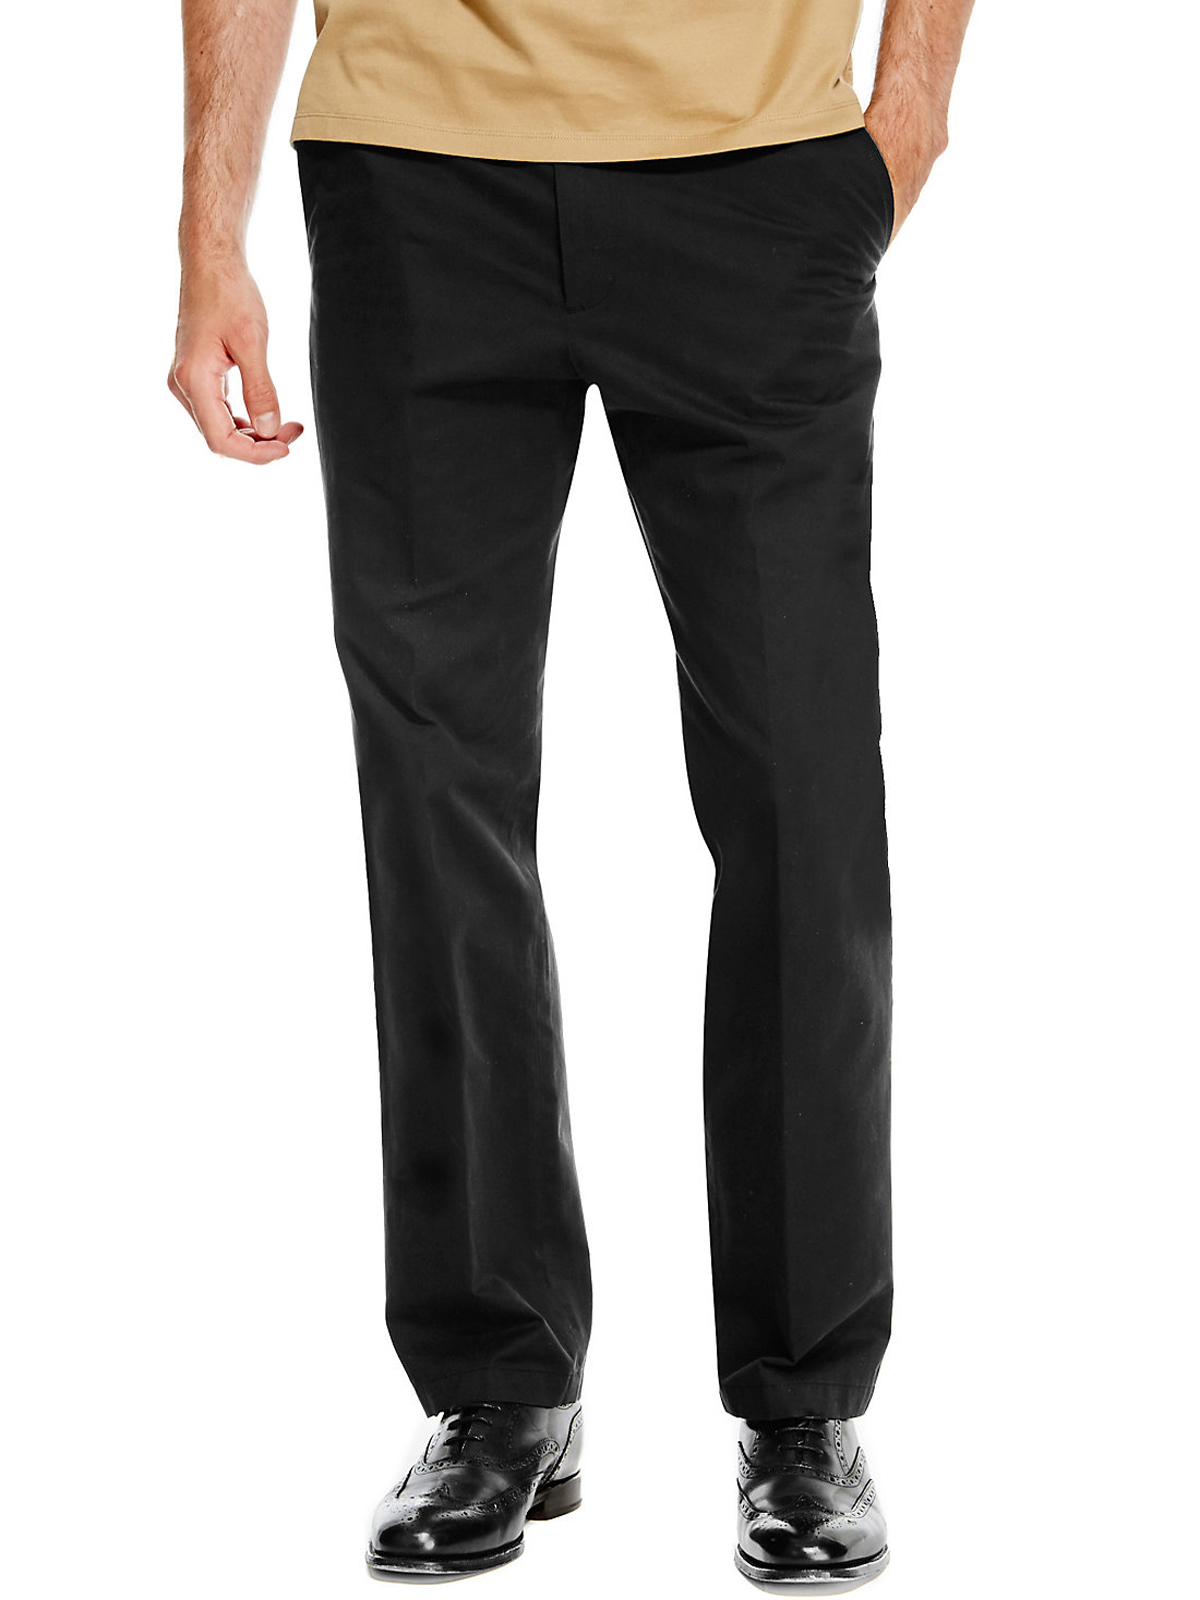 Marks and Spencer - - M&5 ASSORTED Mens Trousers - Waist Size 36 to 42 ...